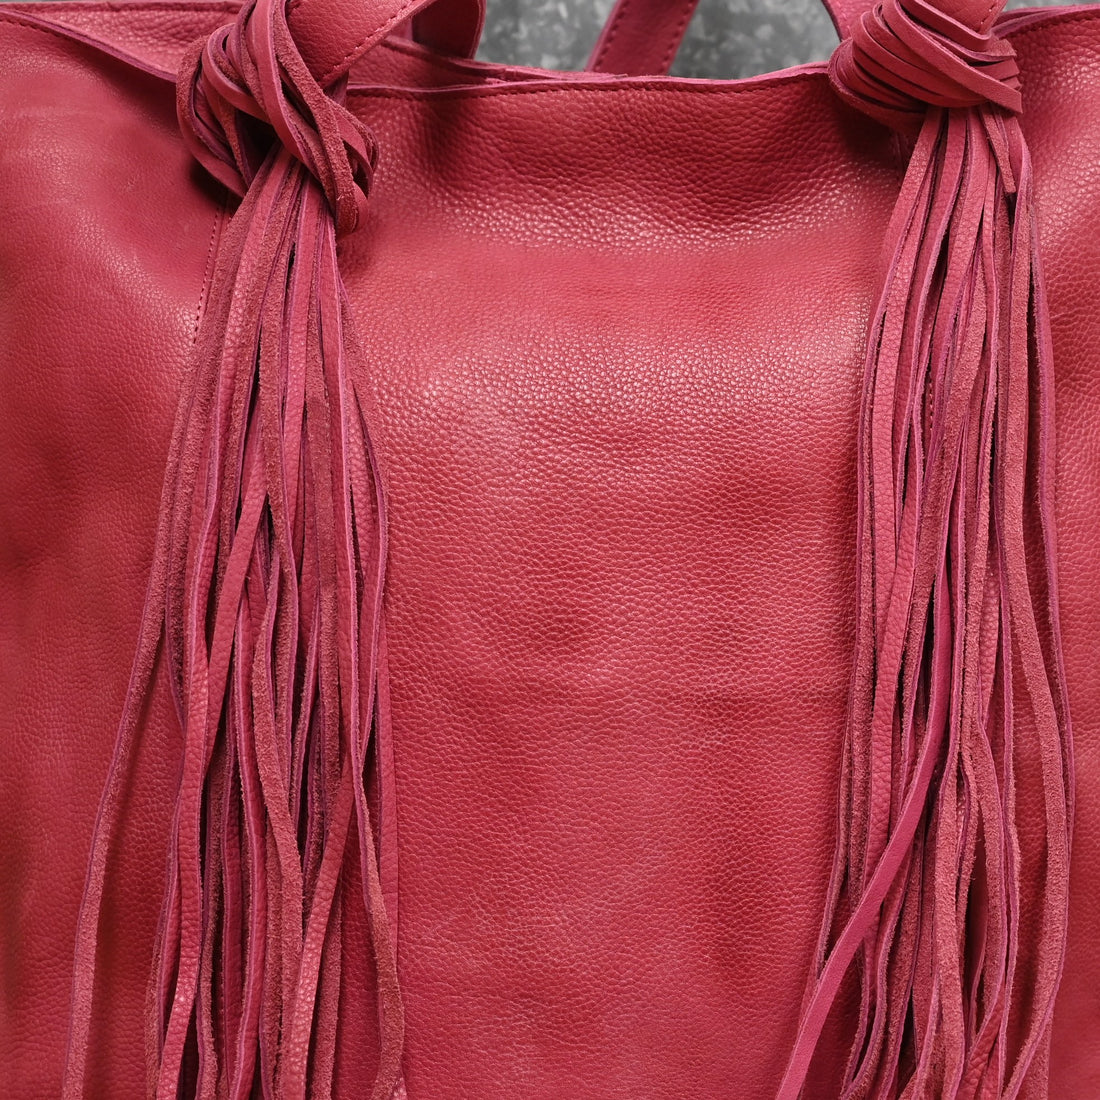 American Darling Leather Shoulder Bag with Fringe Details in Fucia view of details